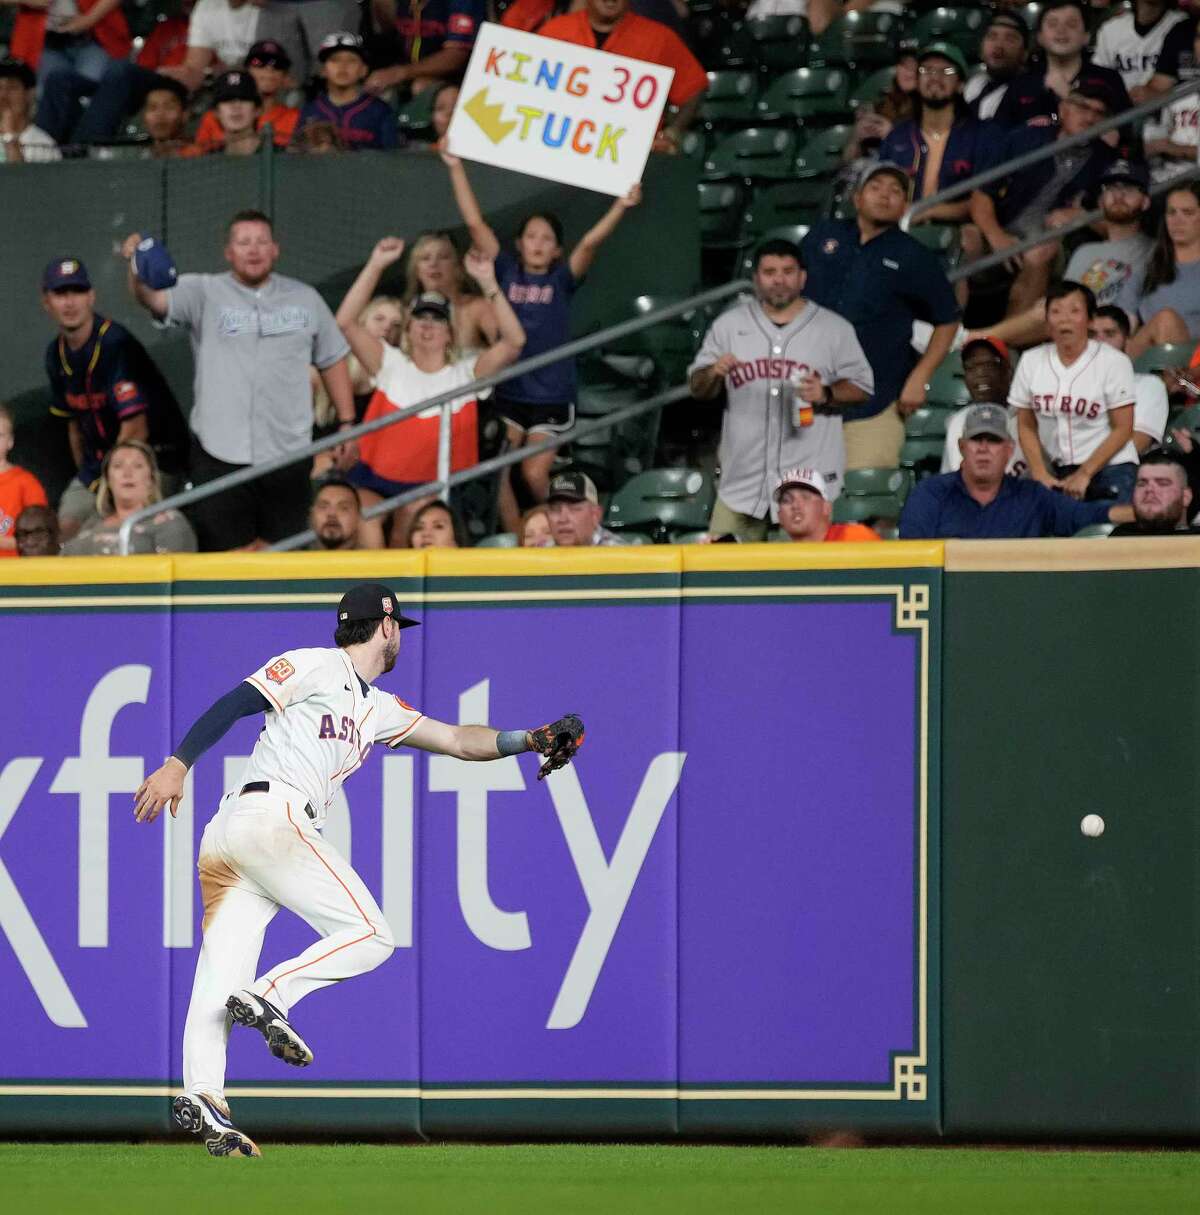 Houston Astros right fielder Kyle Tucker (30) tries to field Kansas City Royals Nicky Lopez’s ground-rule double during the ninth inning of a MLB game at Minute Maid Park on Wednesday, July 6, 2022 in Houston.